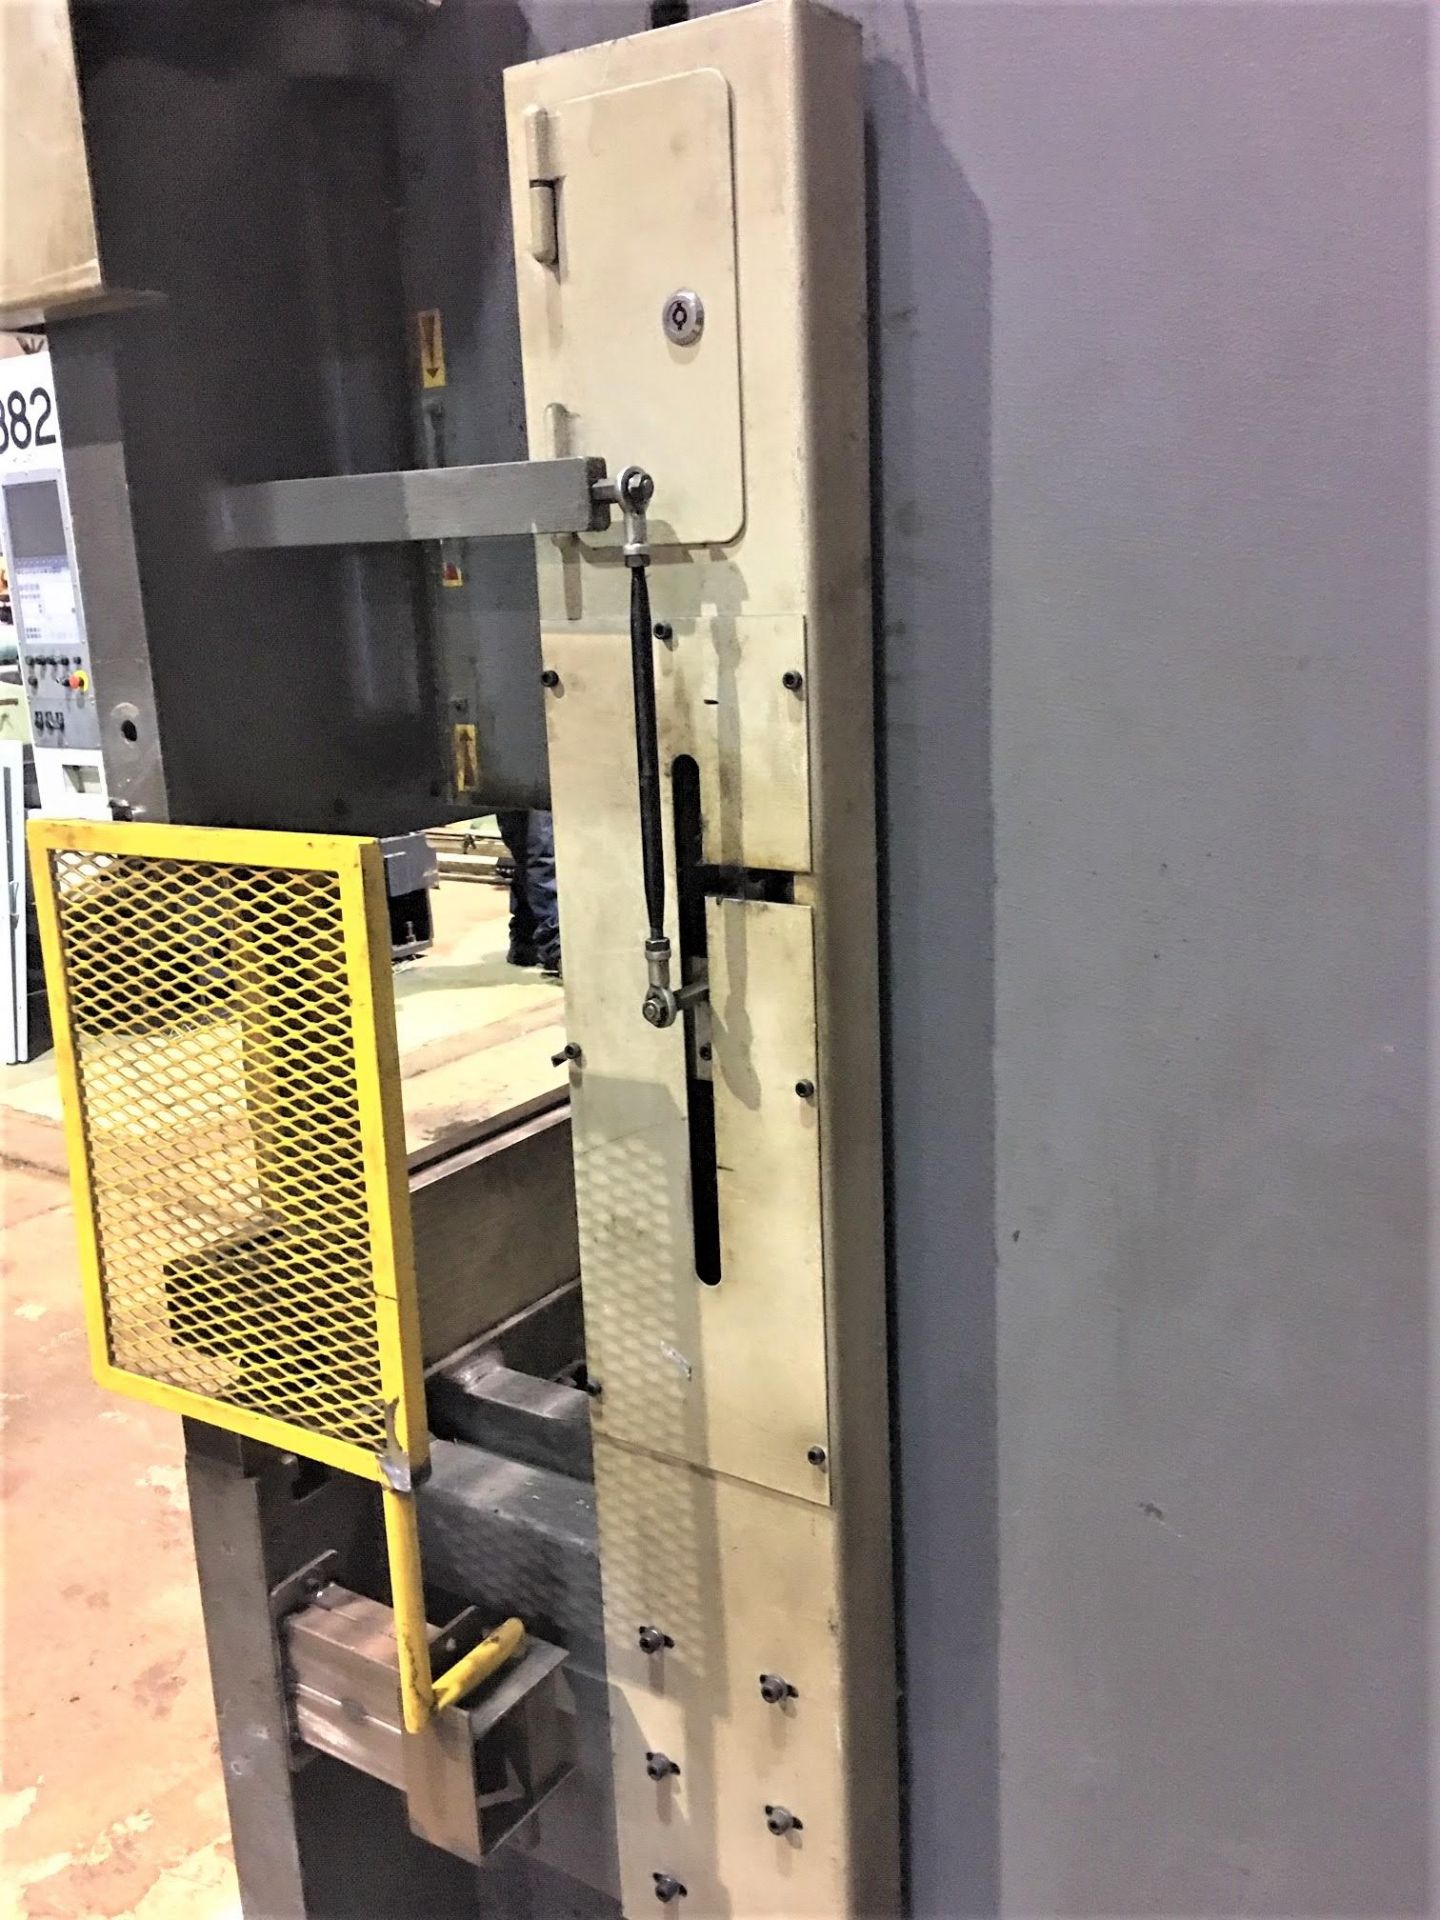 Haco Atlantic CNC Hydraulic Press Brake 120 Ton x 10', Located In Painesville, OH - 8615P - Image 6 of 14